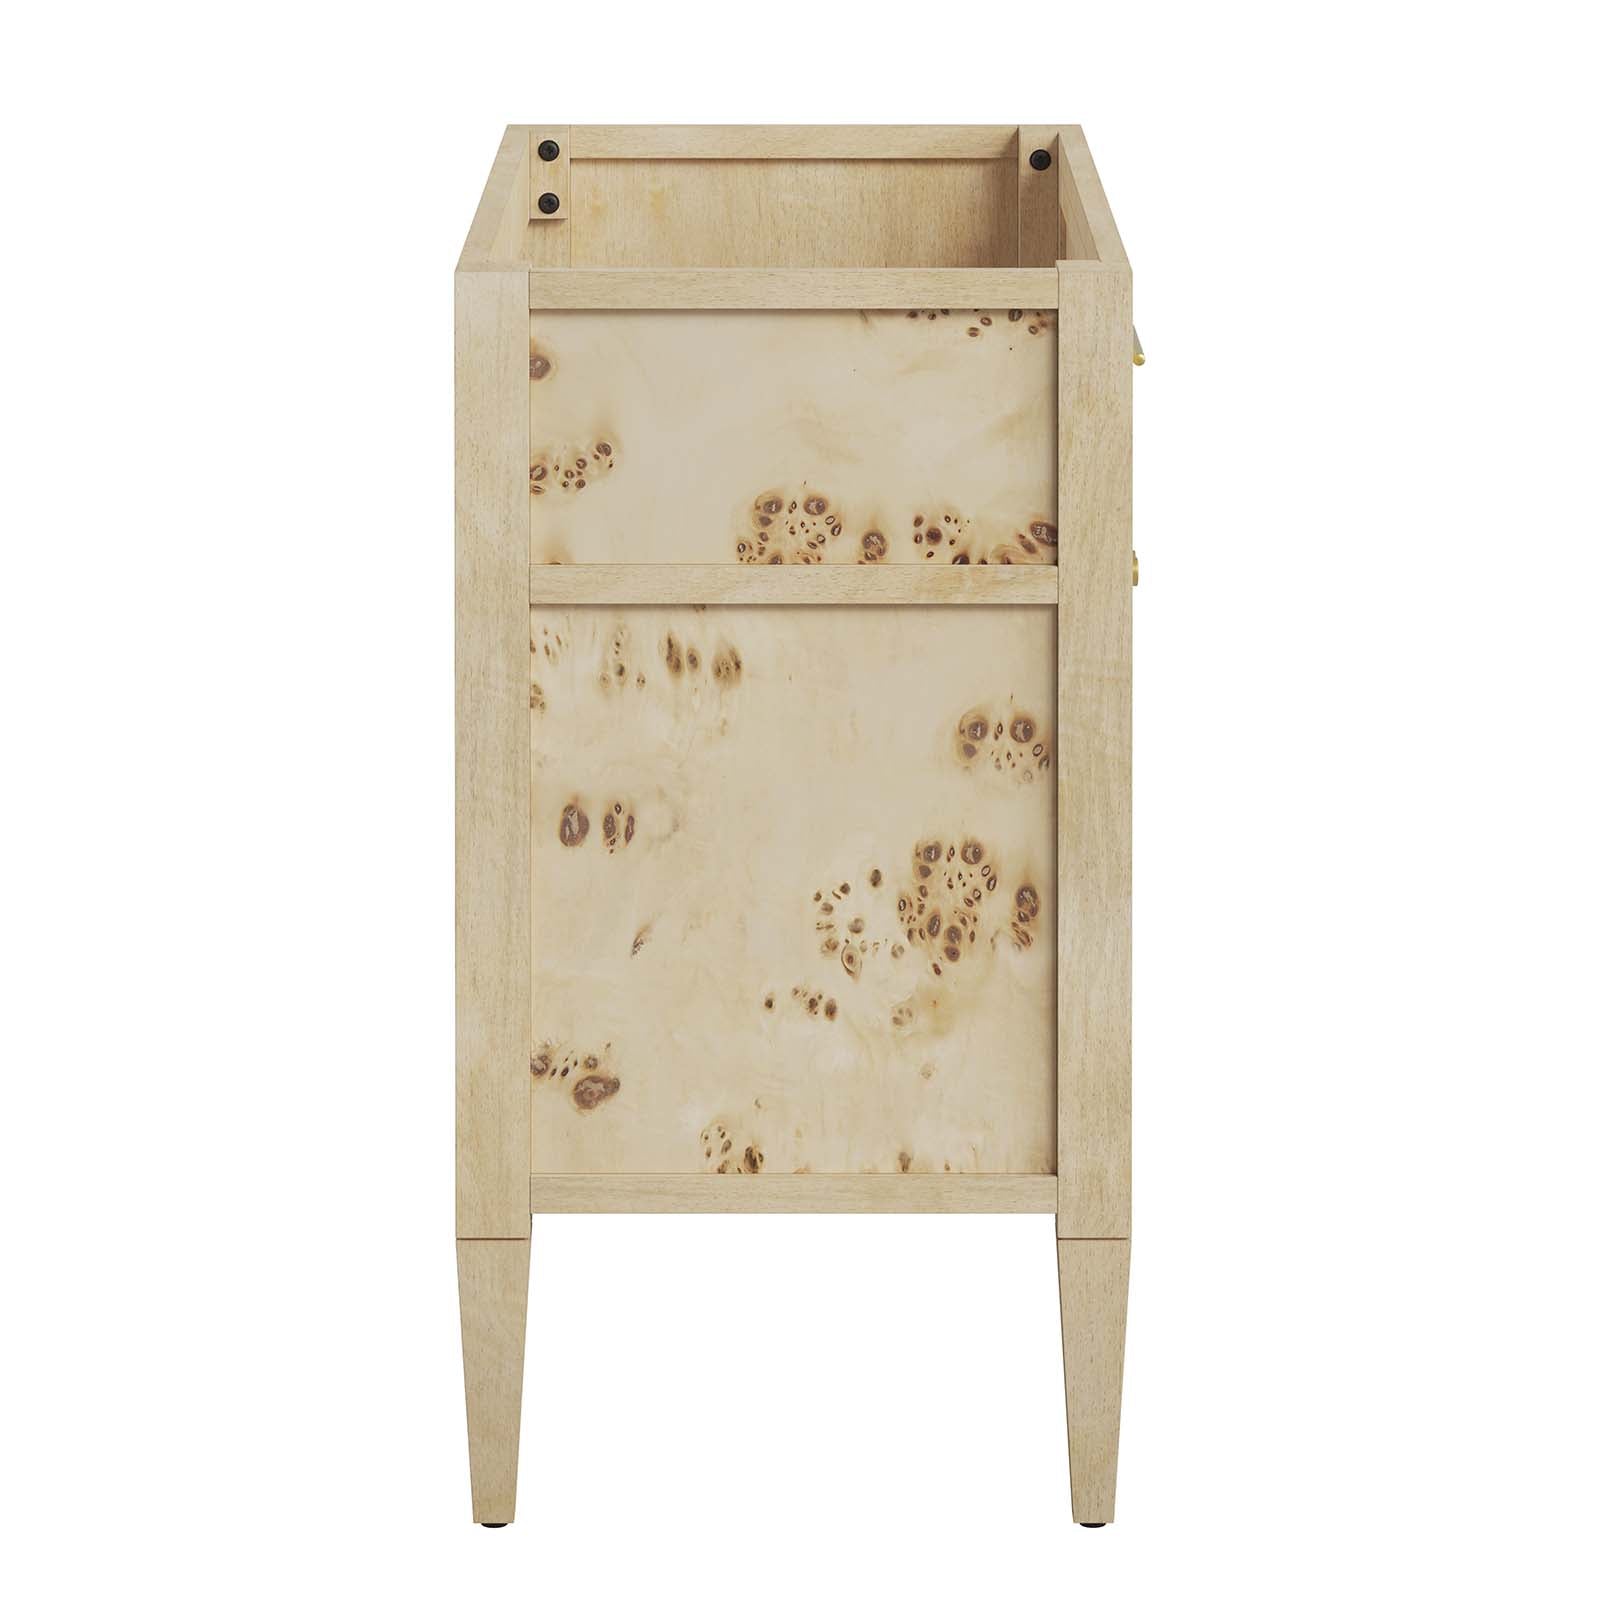 Elysian 36" Wood Bathroom Vanity Cabinet (Sink Basin Not Included) By Modway - EEI-6139 | Bathroom Accessories | Modway - 12